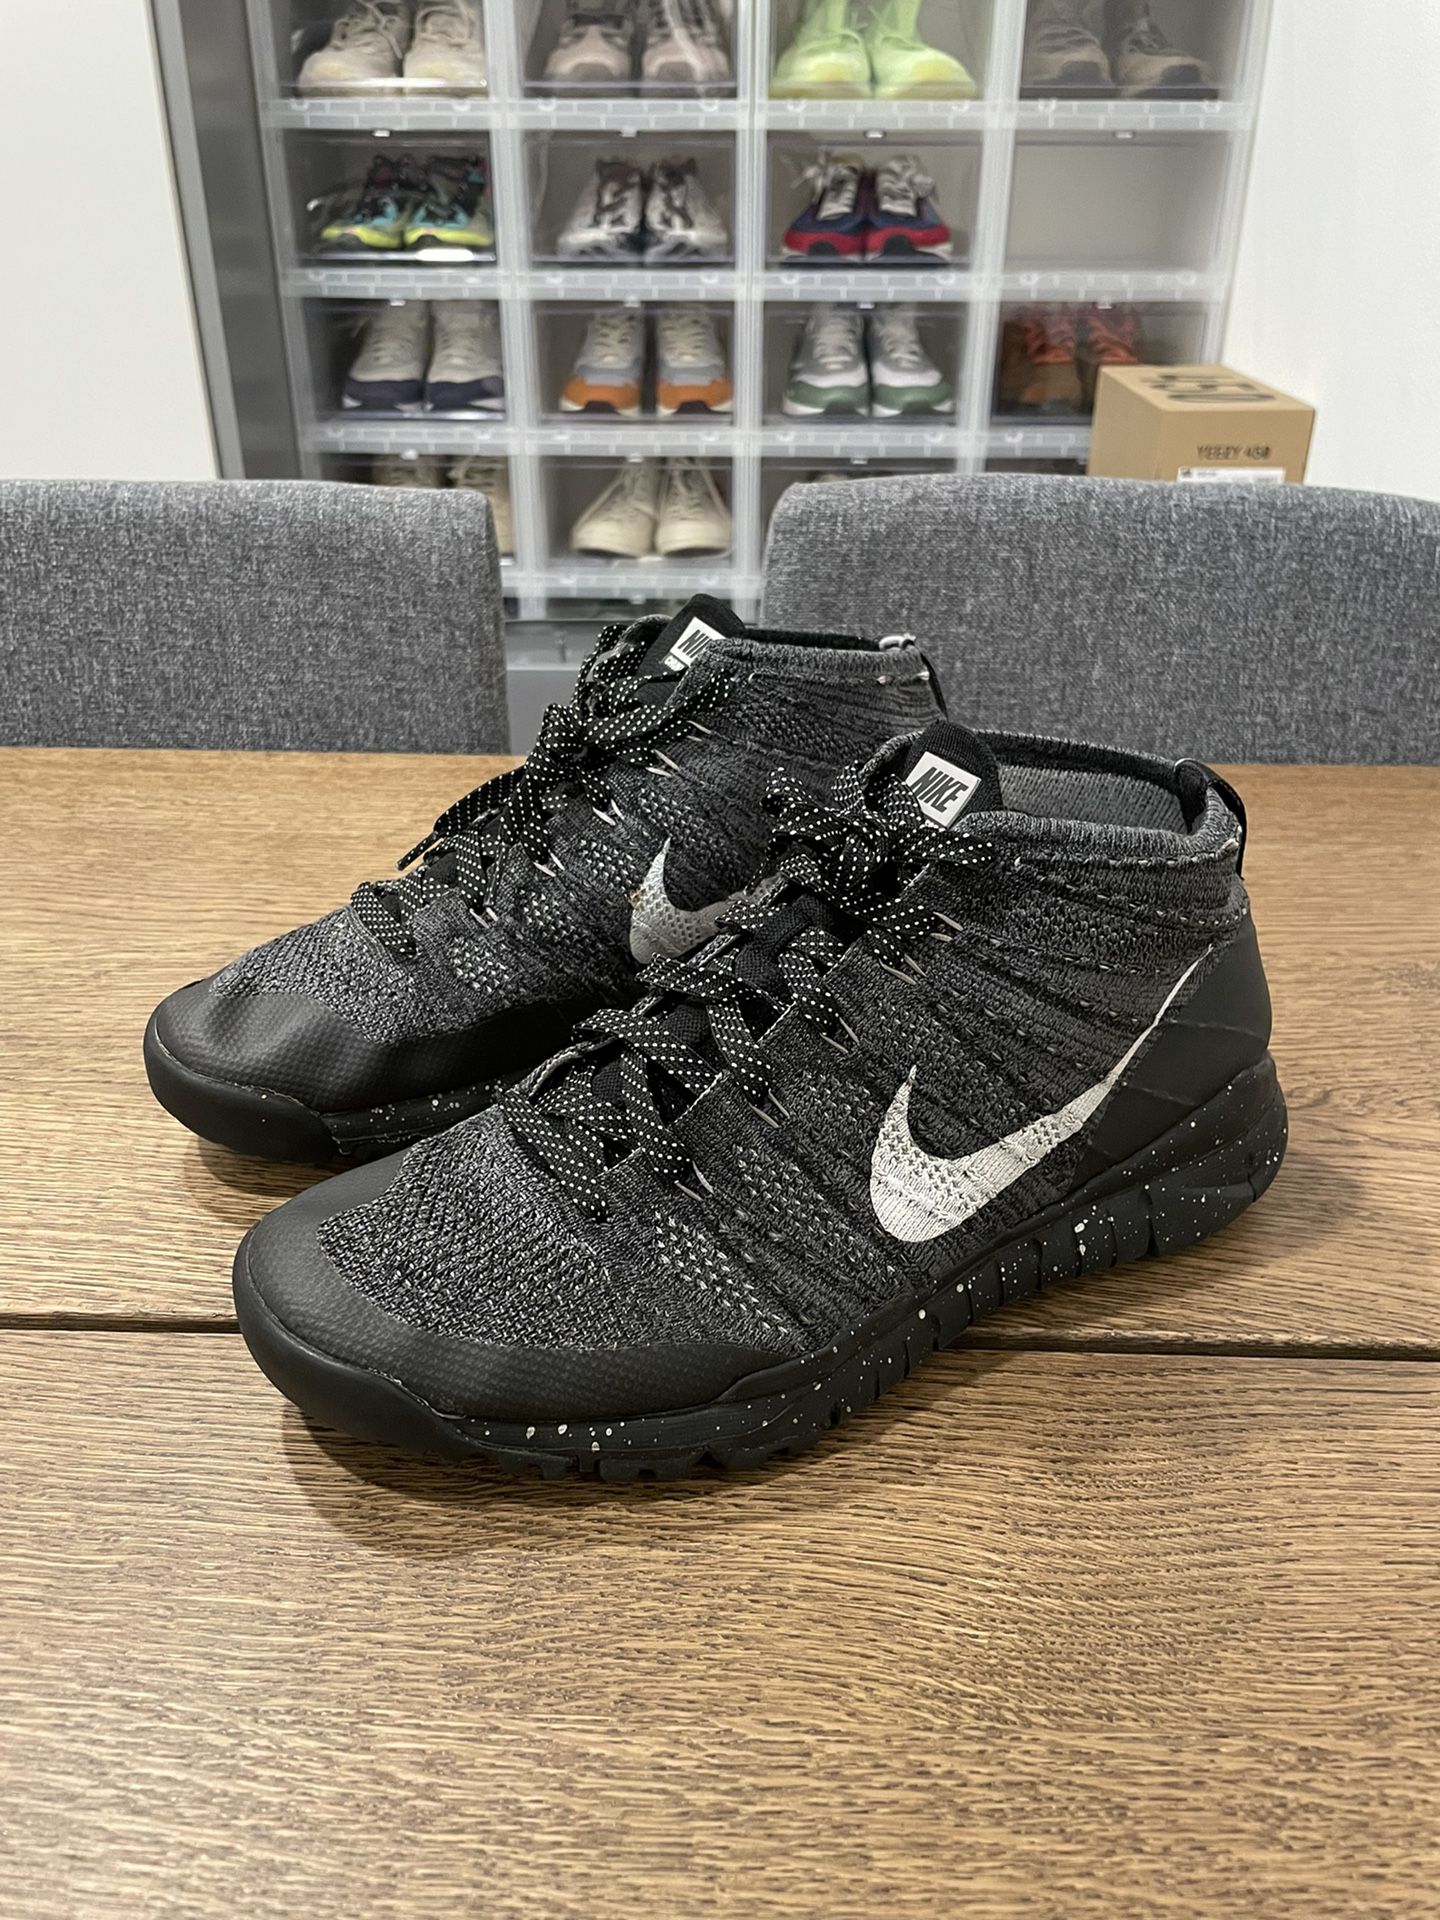 Nike Flyknit Trainer FSB Charcoal Sz 10.5 (used) for Sale in Oakland, CA - OfferUp